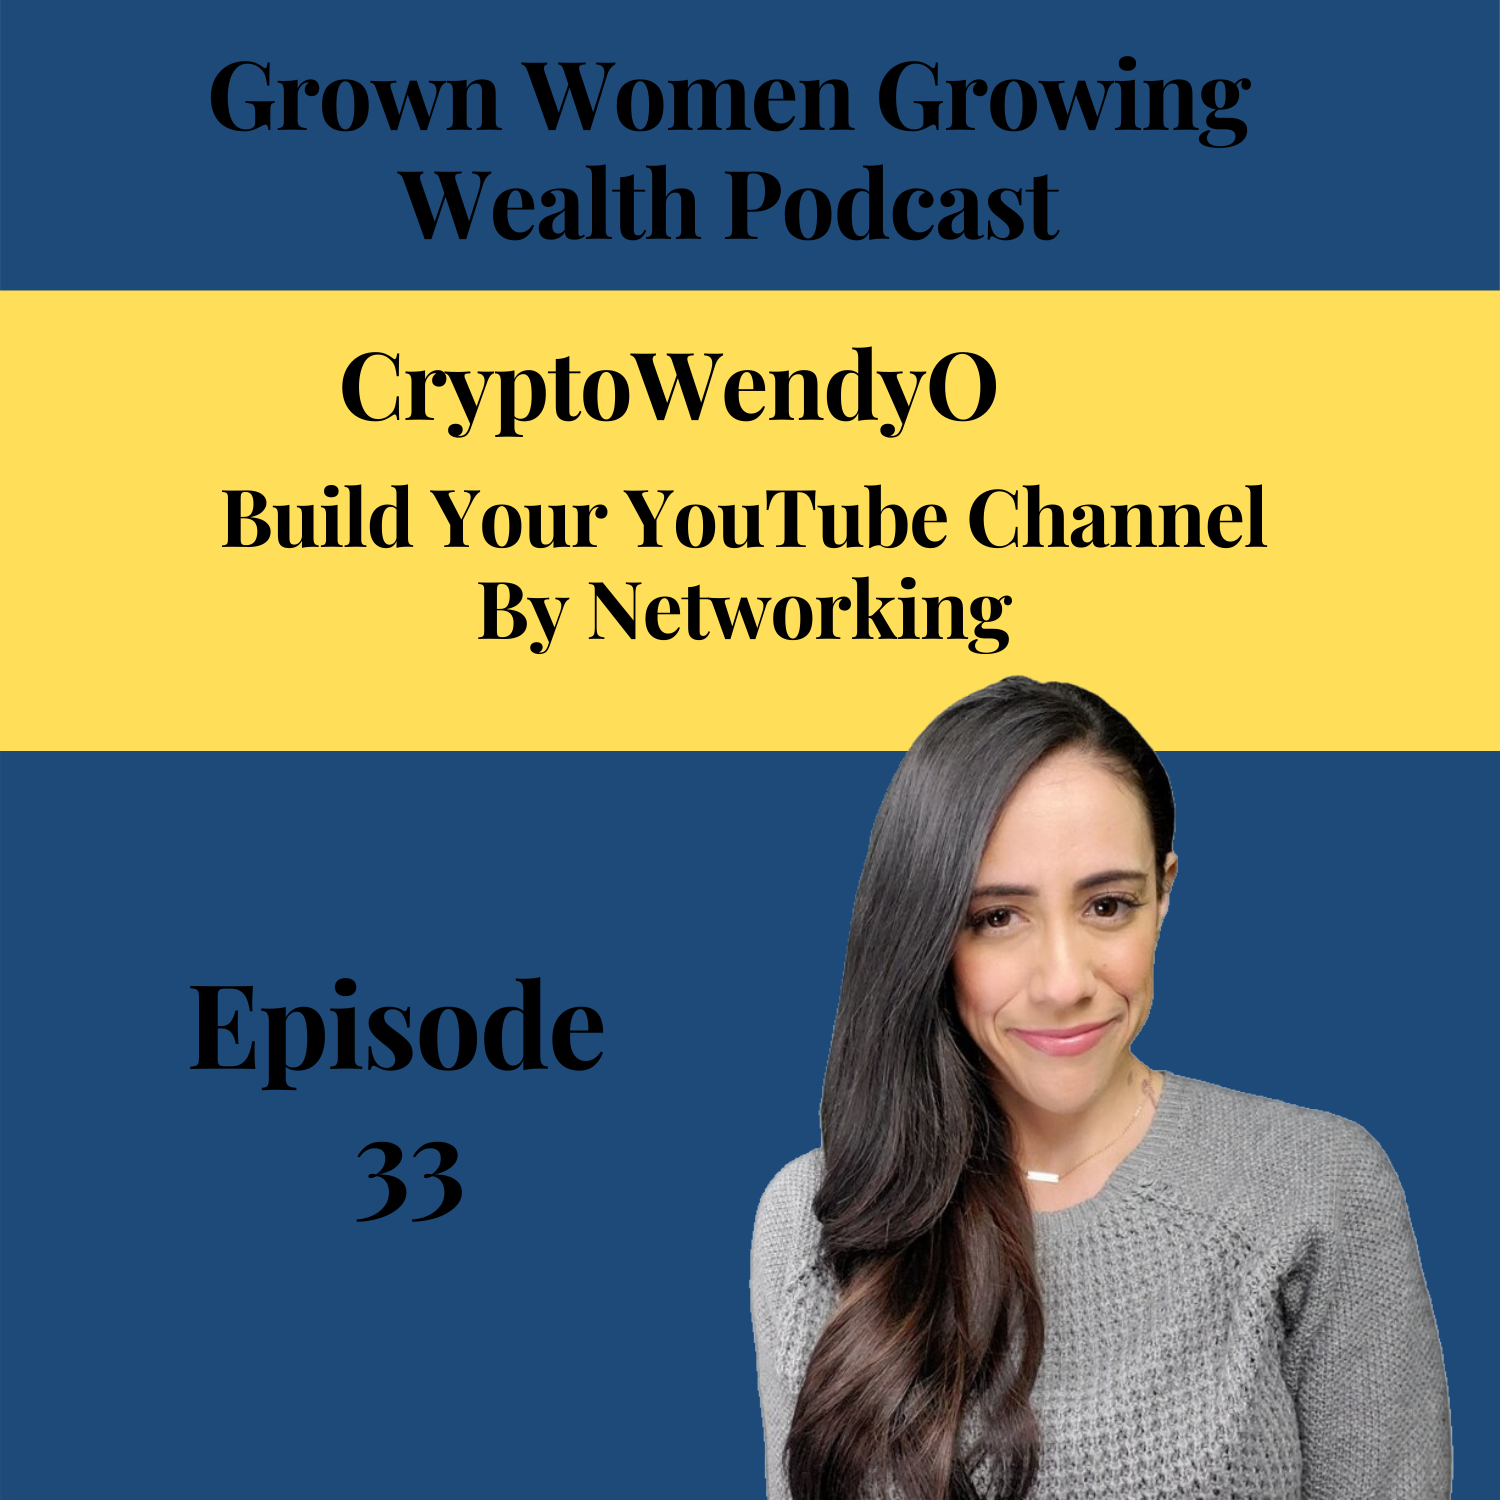 Ep 33 Build Your YouTube Channel By Networking w Crypto Wendy O Image